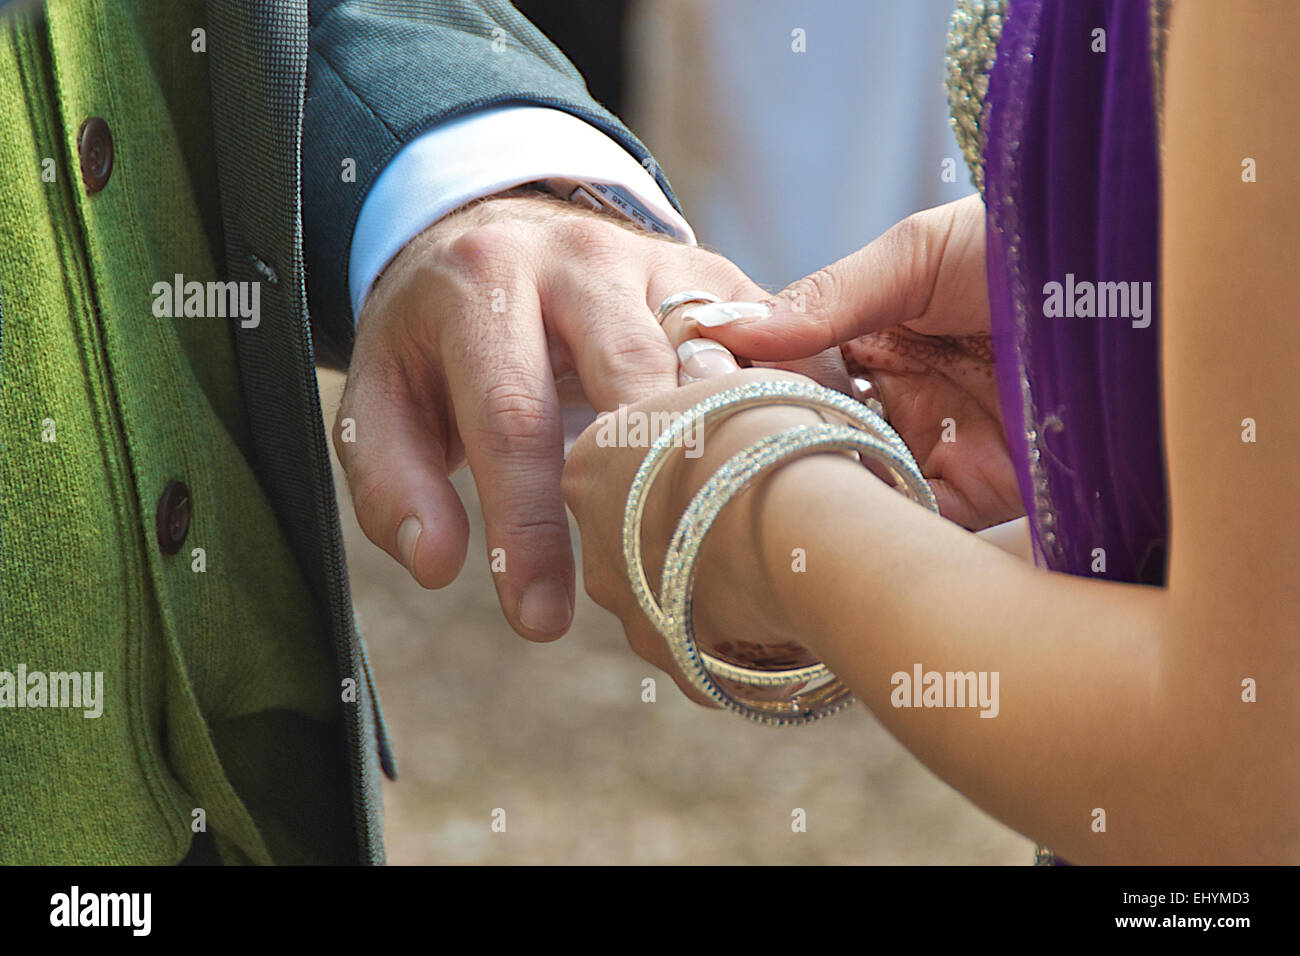 Couple exchanging rings at wedding ceremony Stock Photo